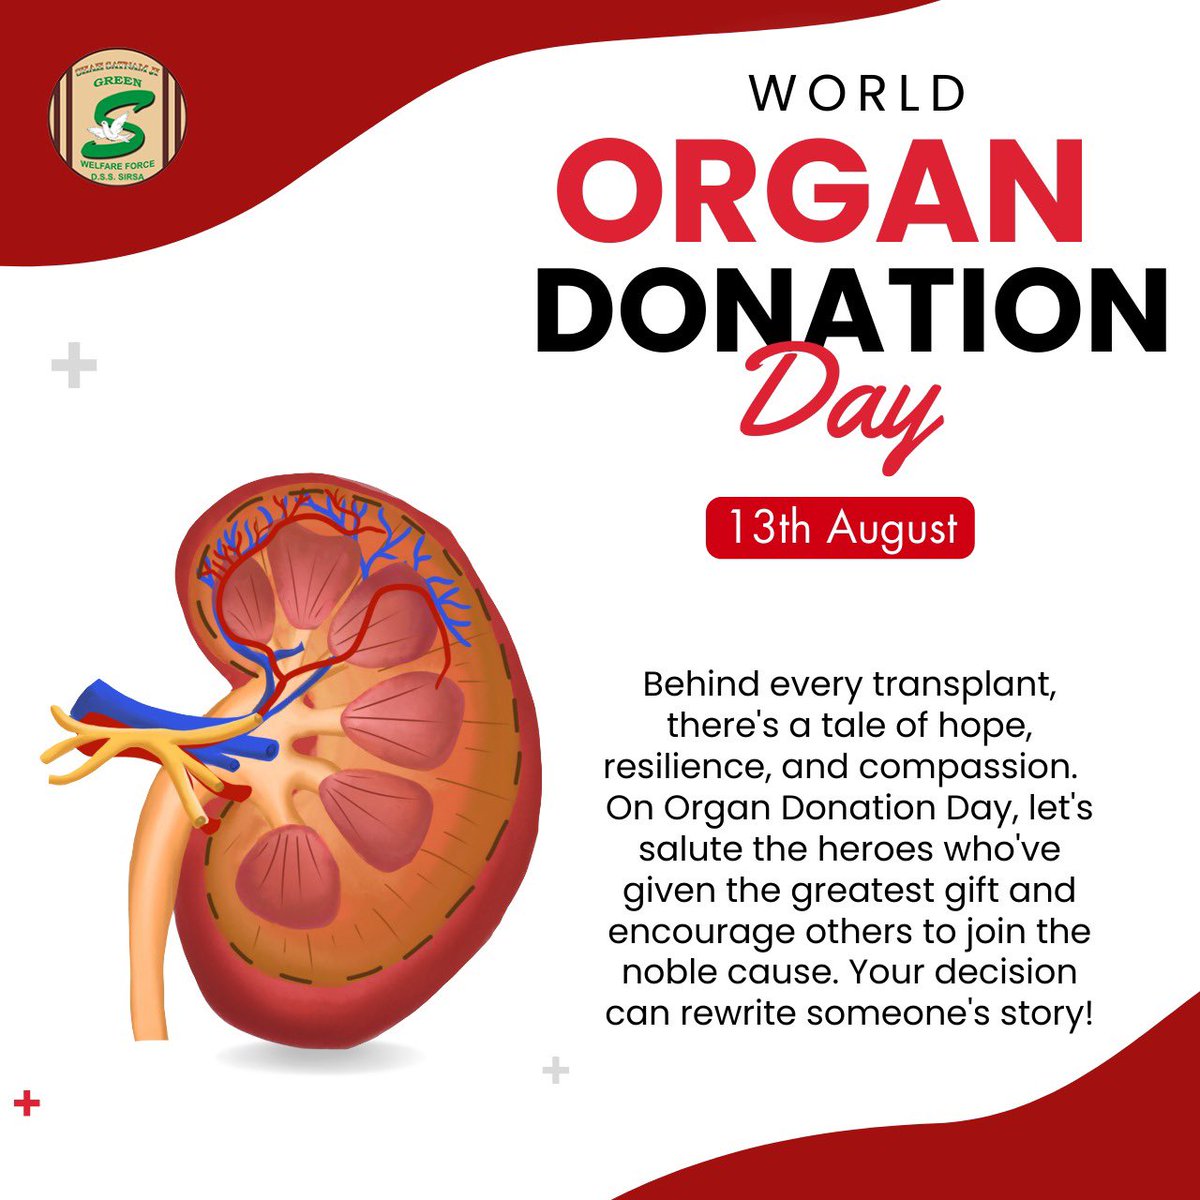 Donating any part of the body by a human being is a big donation. With the inspiration of Saint MSG Insan, Dera followers give life to needy people by donating organs. 
#WorldOrganDonationDay